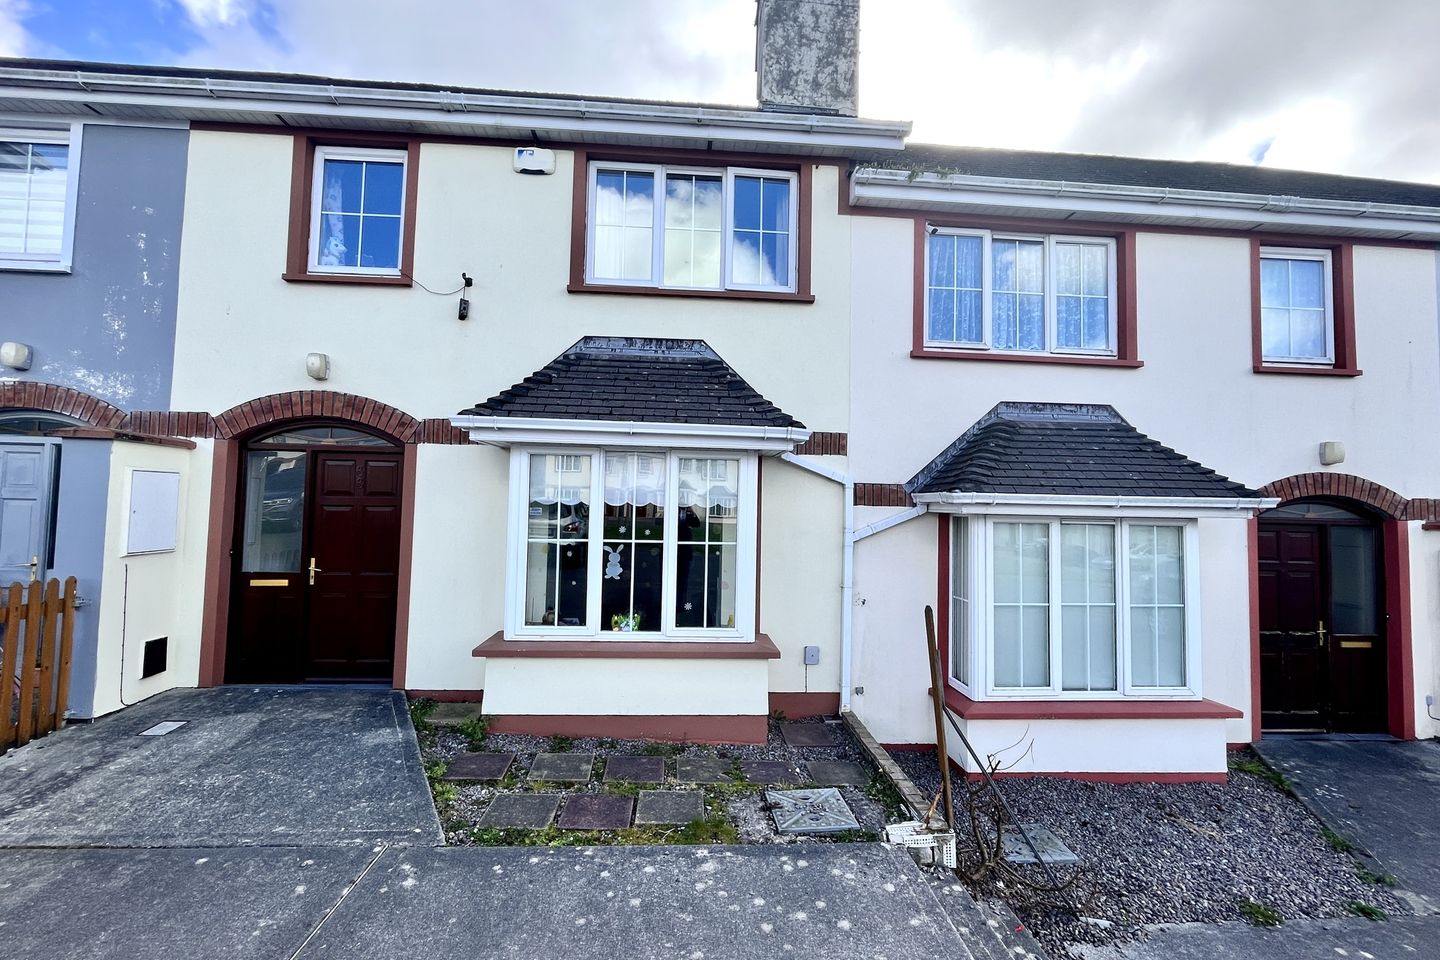 33 Woodview Park, Killeen, Tralee, Co. Kerry